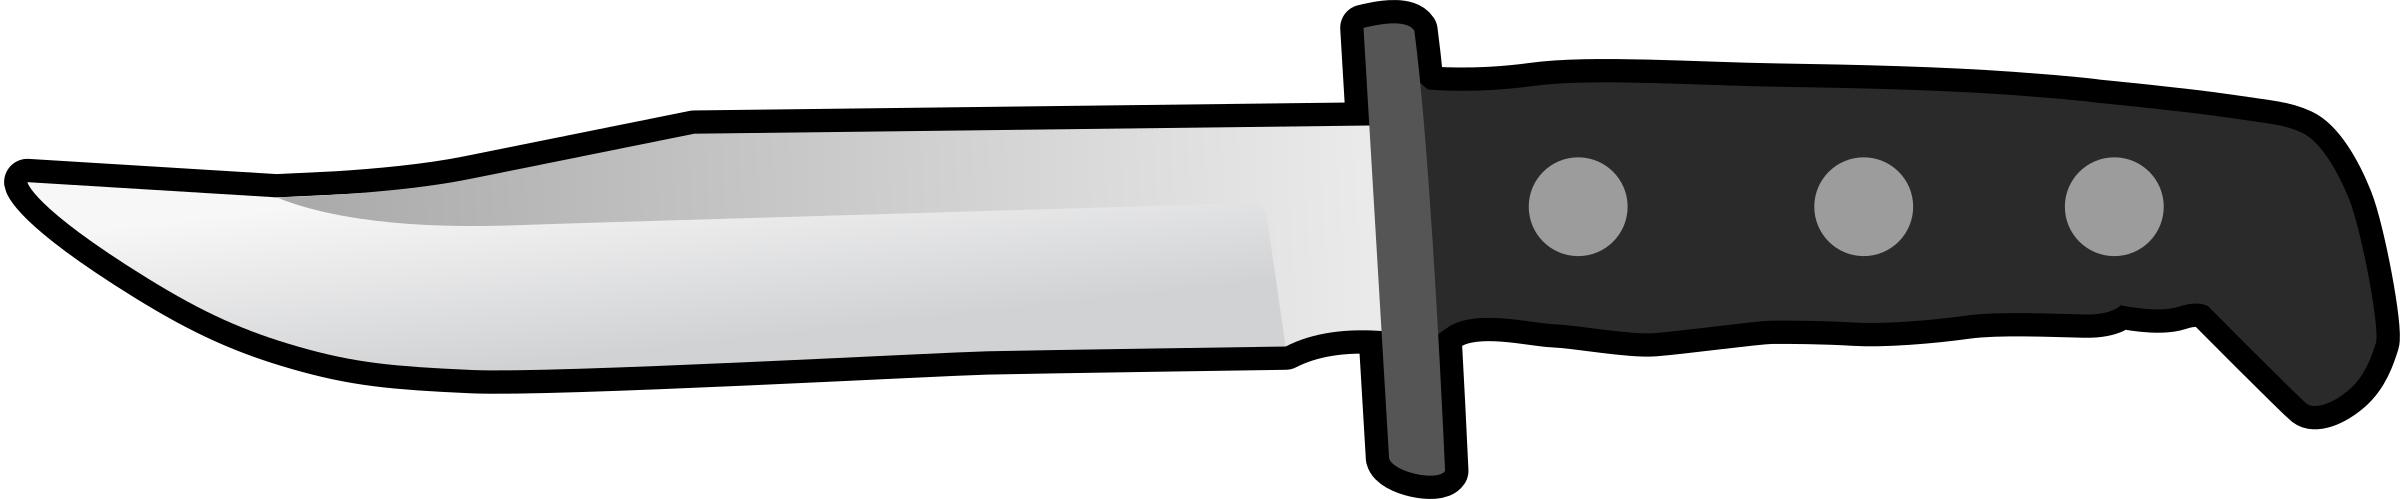 Simple Flat Knife Side View png